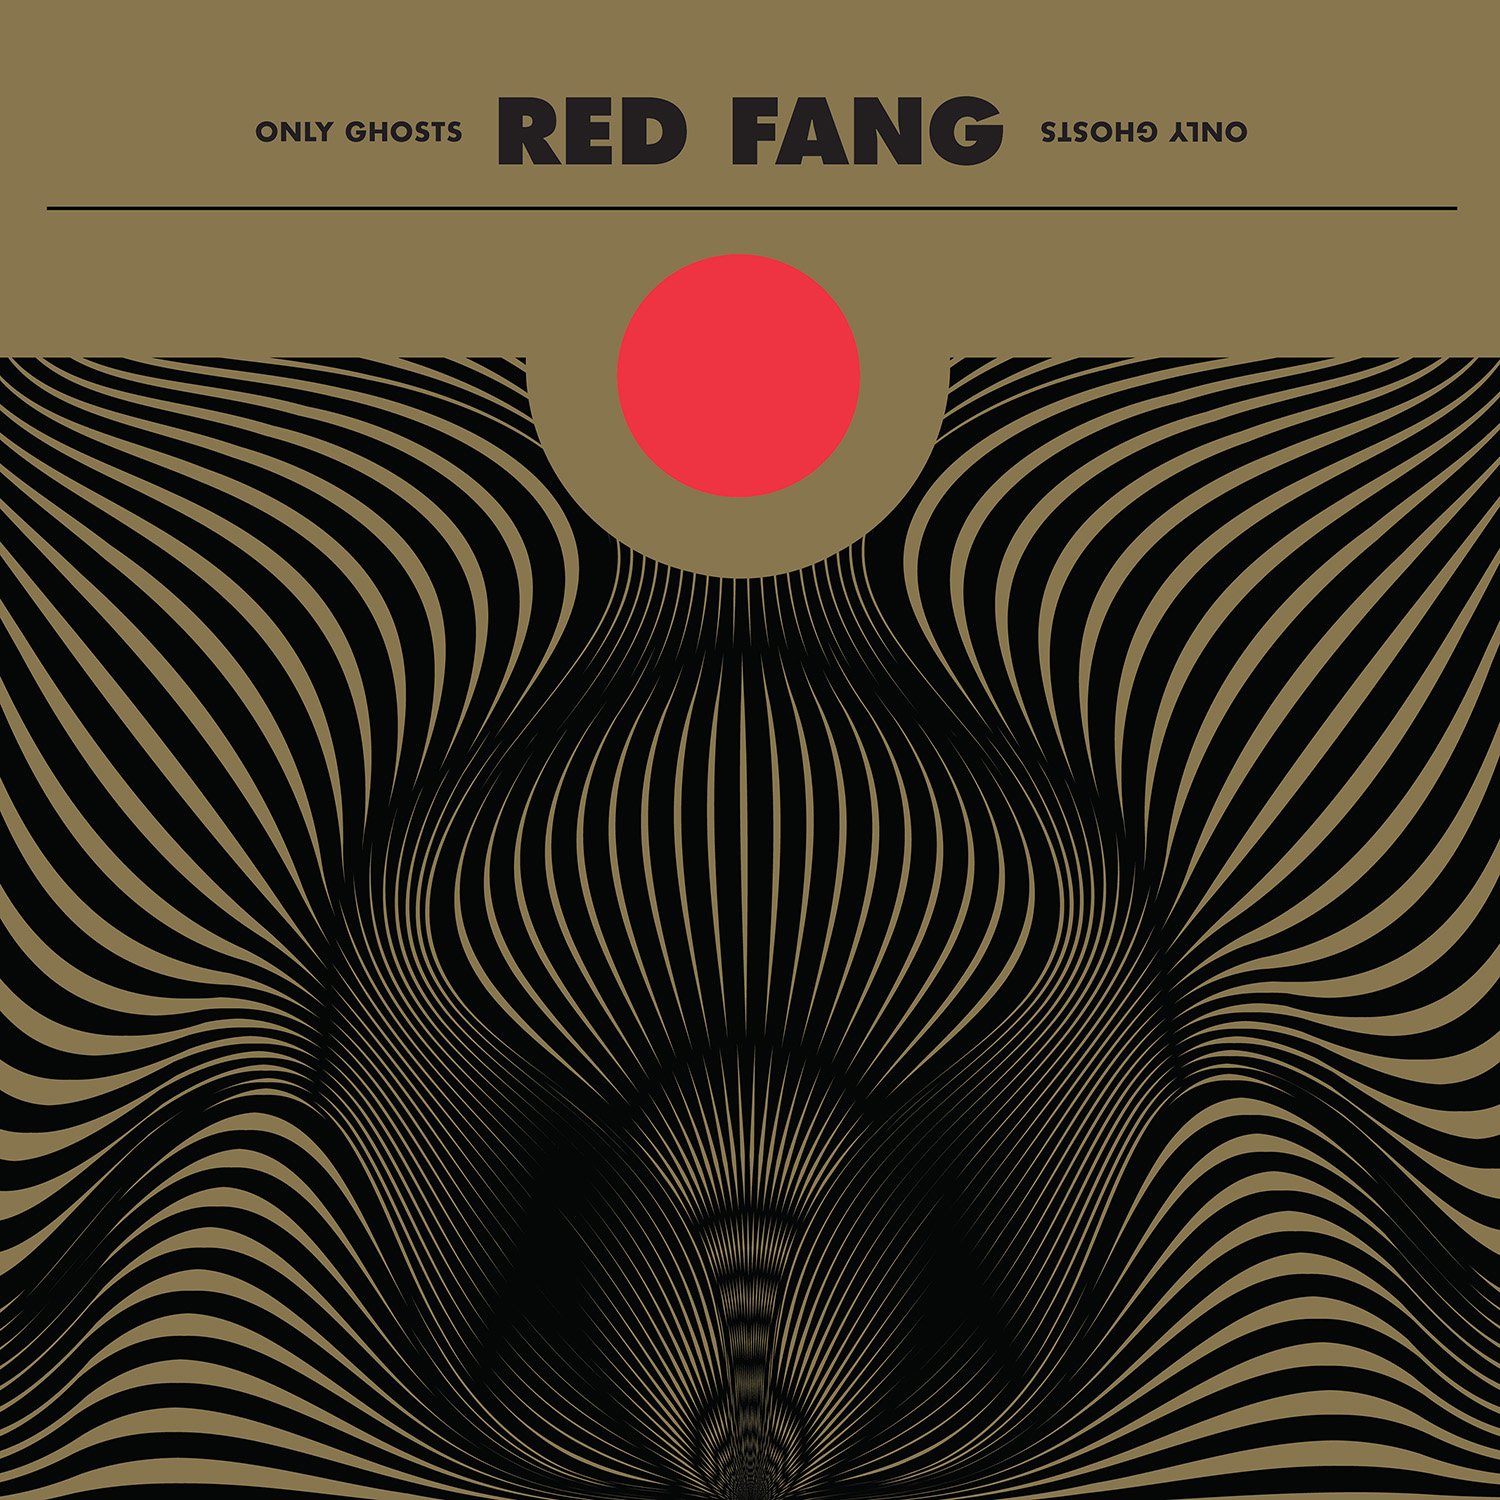 RED FANG nuevo álbum “Only Ghosts” en streaming